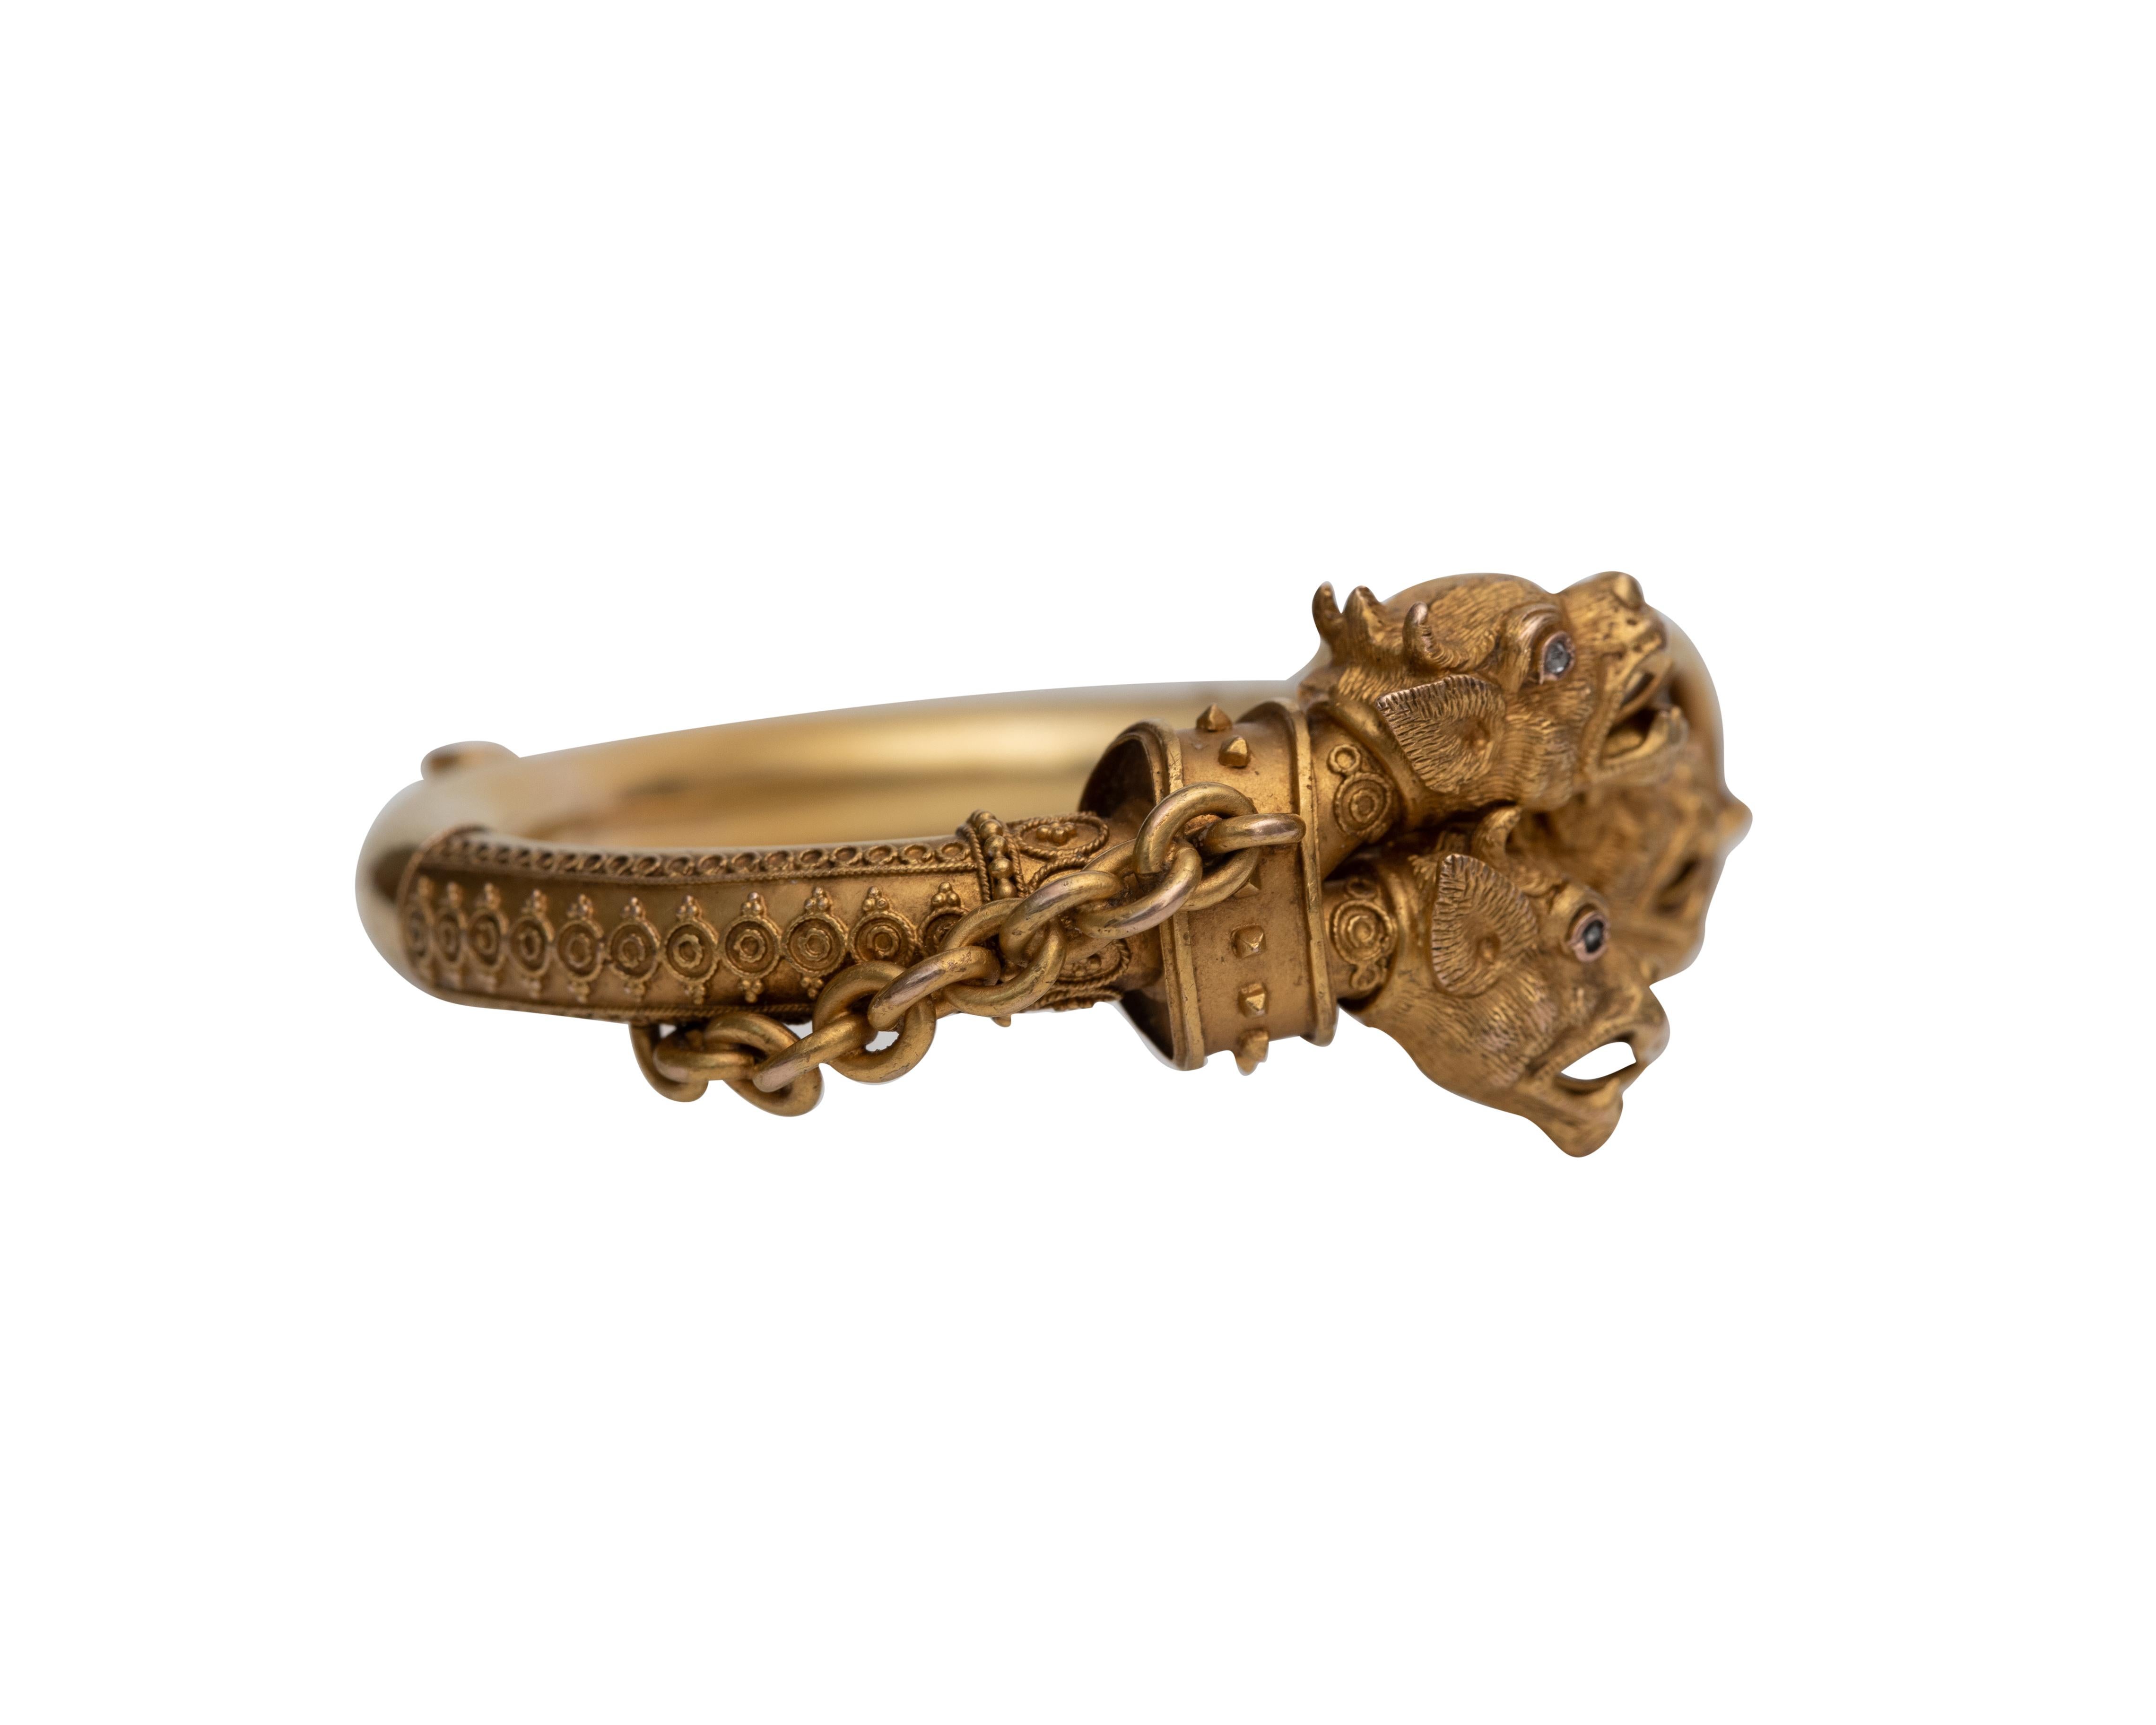 Description: 
Here we have a unique 1876 15K Yellow Gold Cerebrus head bangle. The Greek mythological being is known as the 